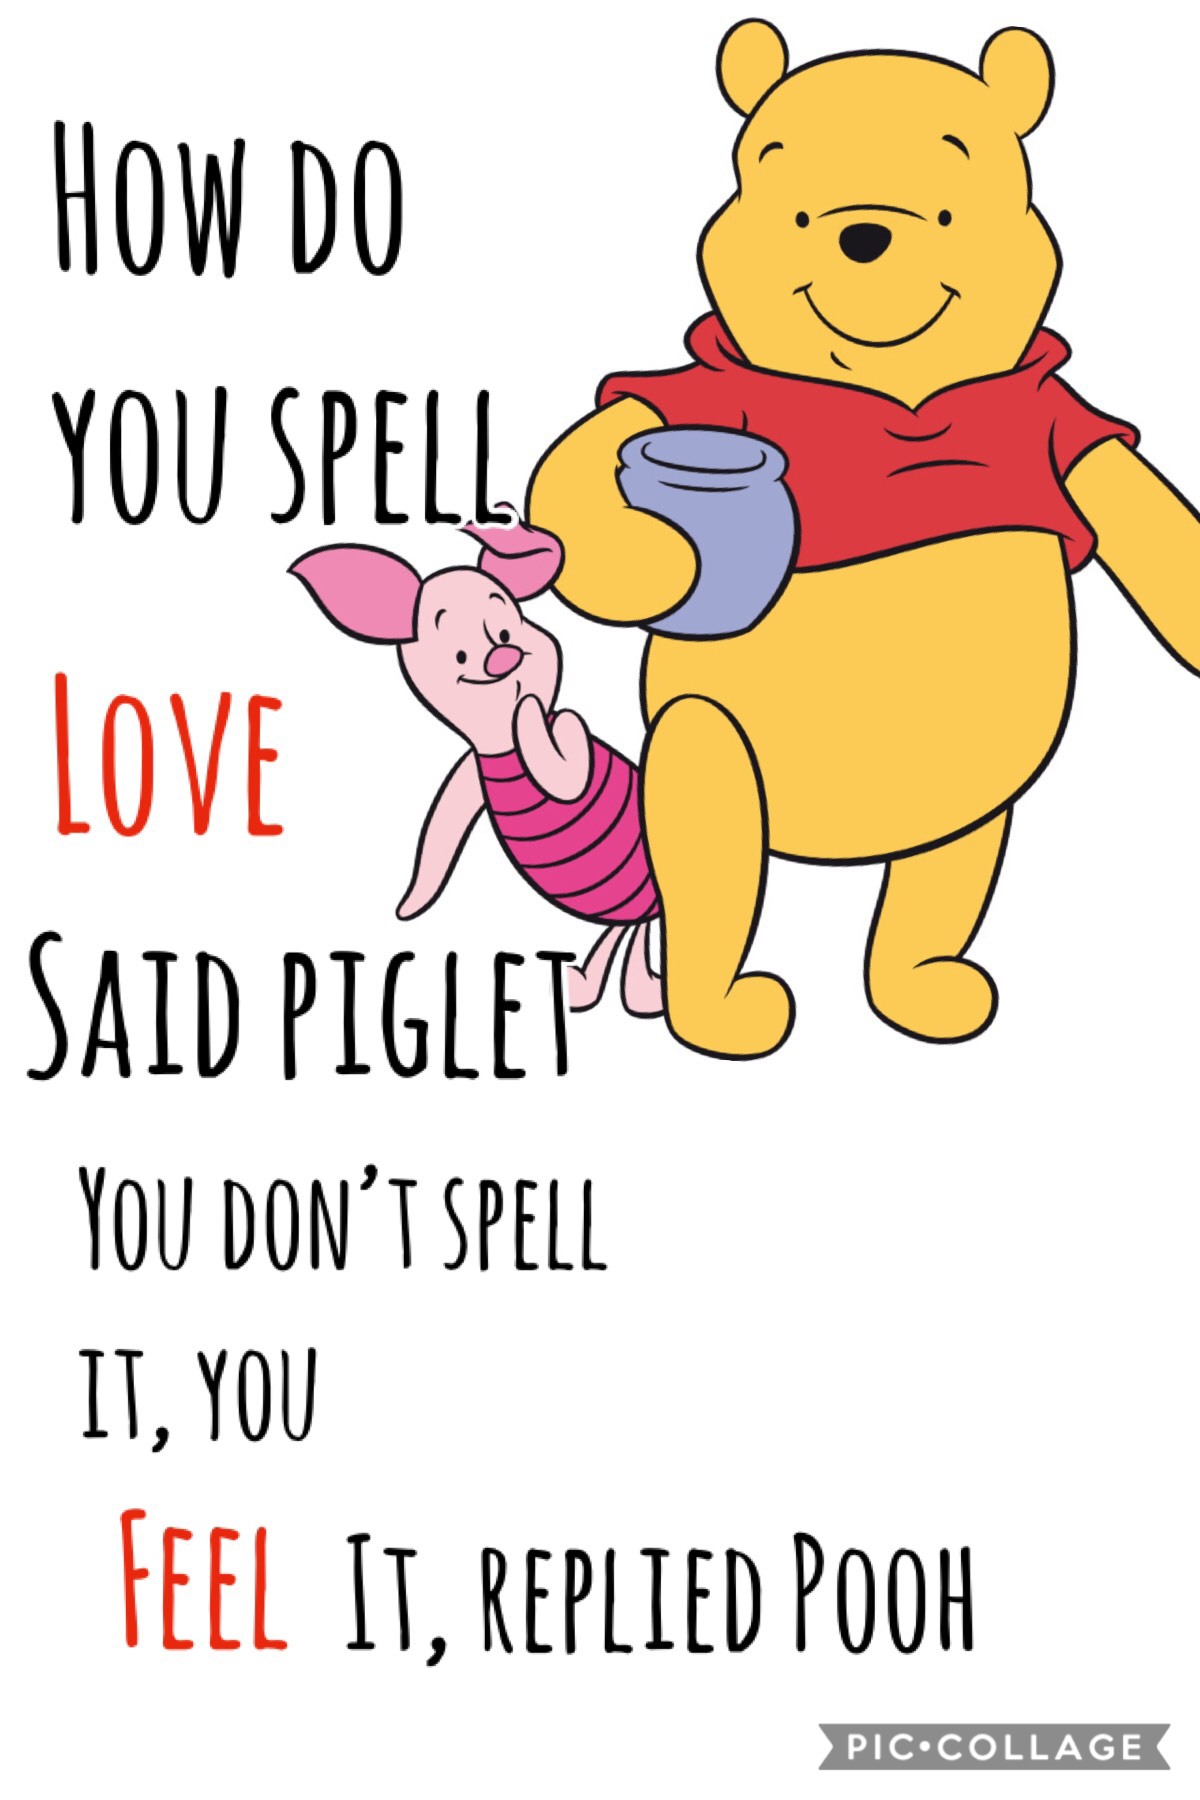 Like this post if you used to love Winnie the Pooh 